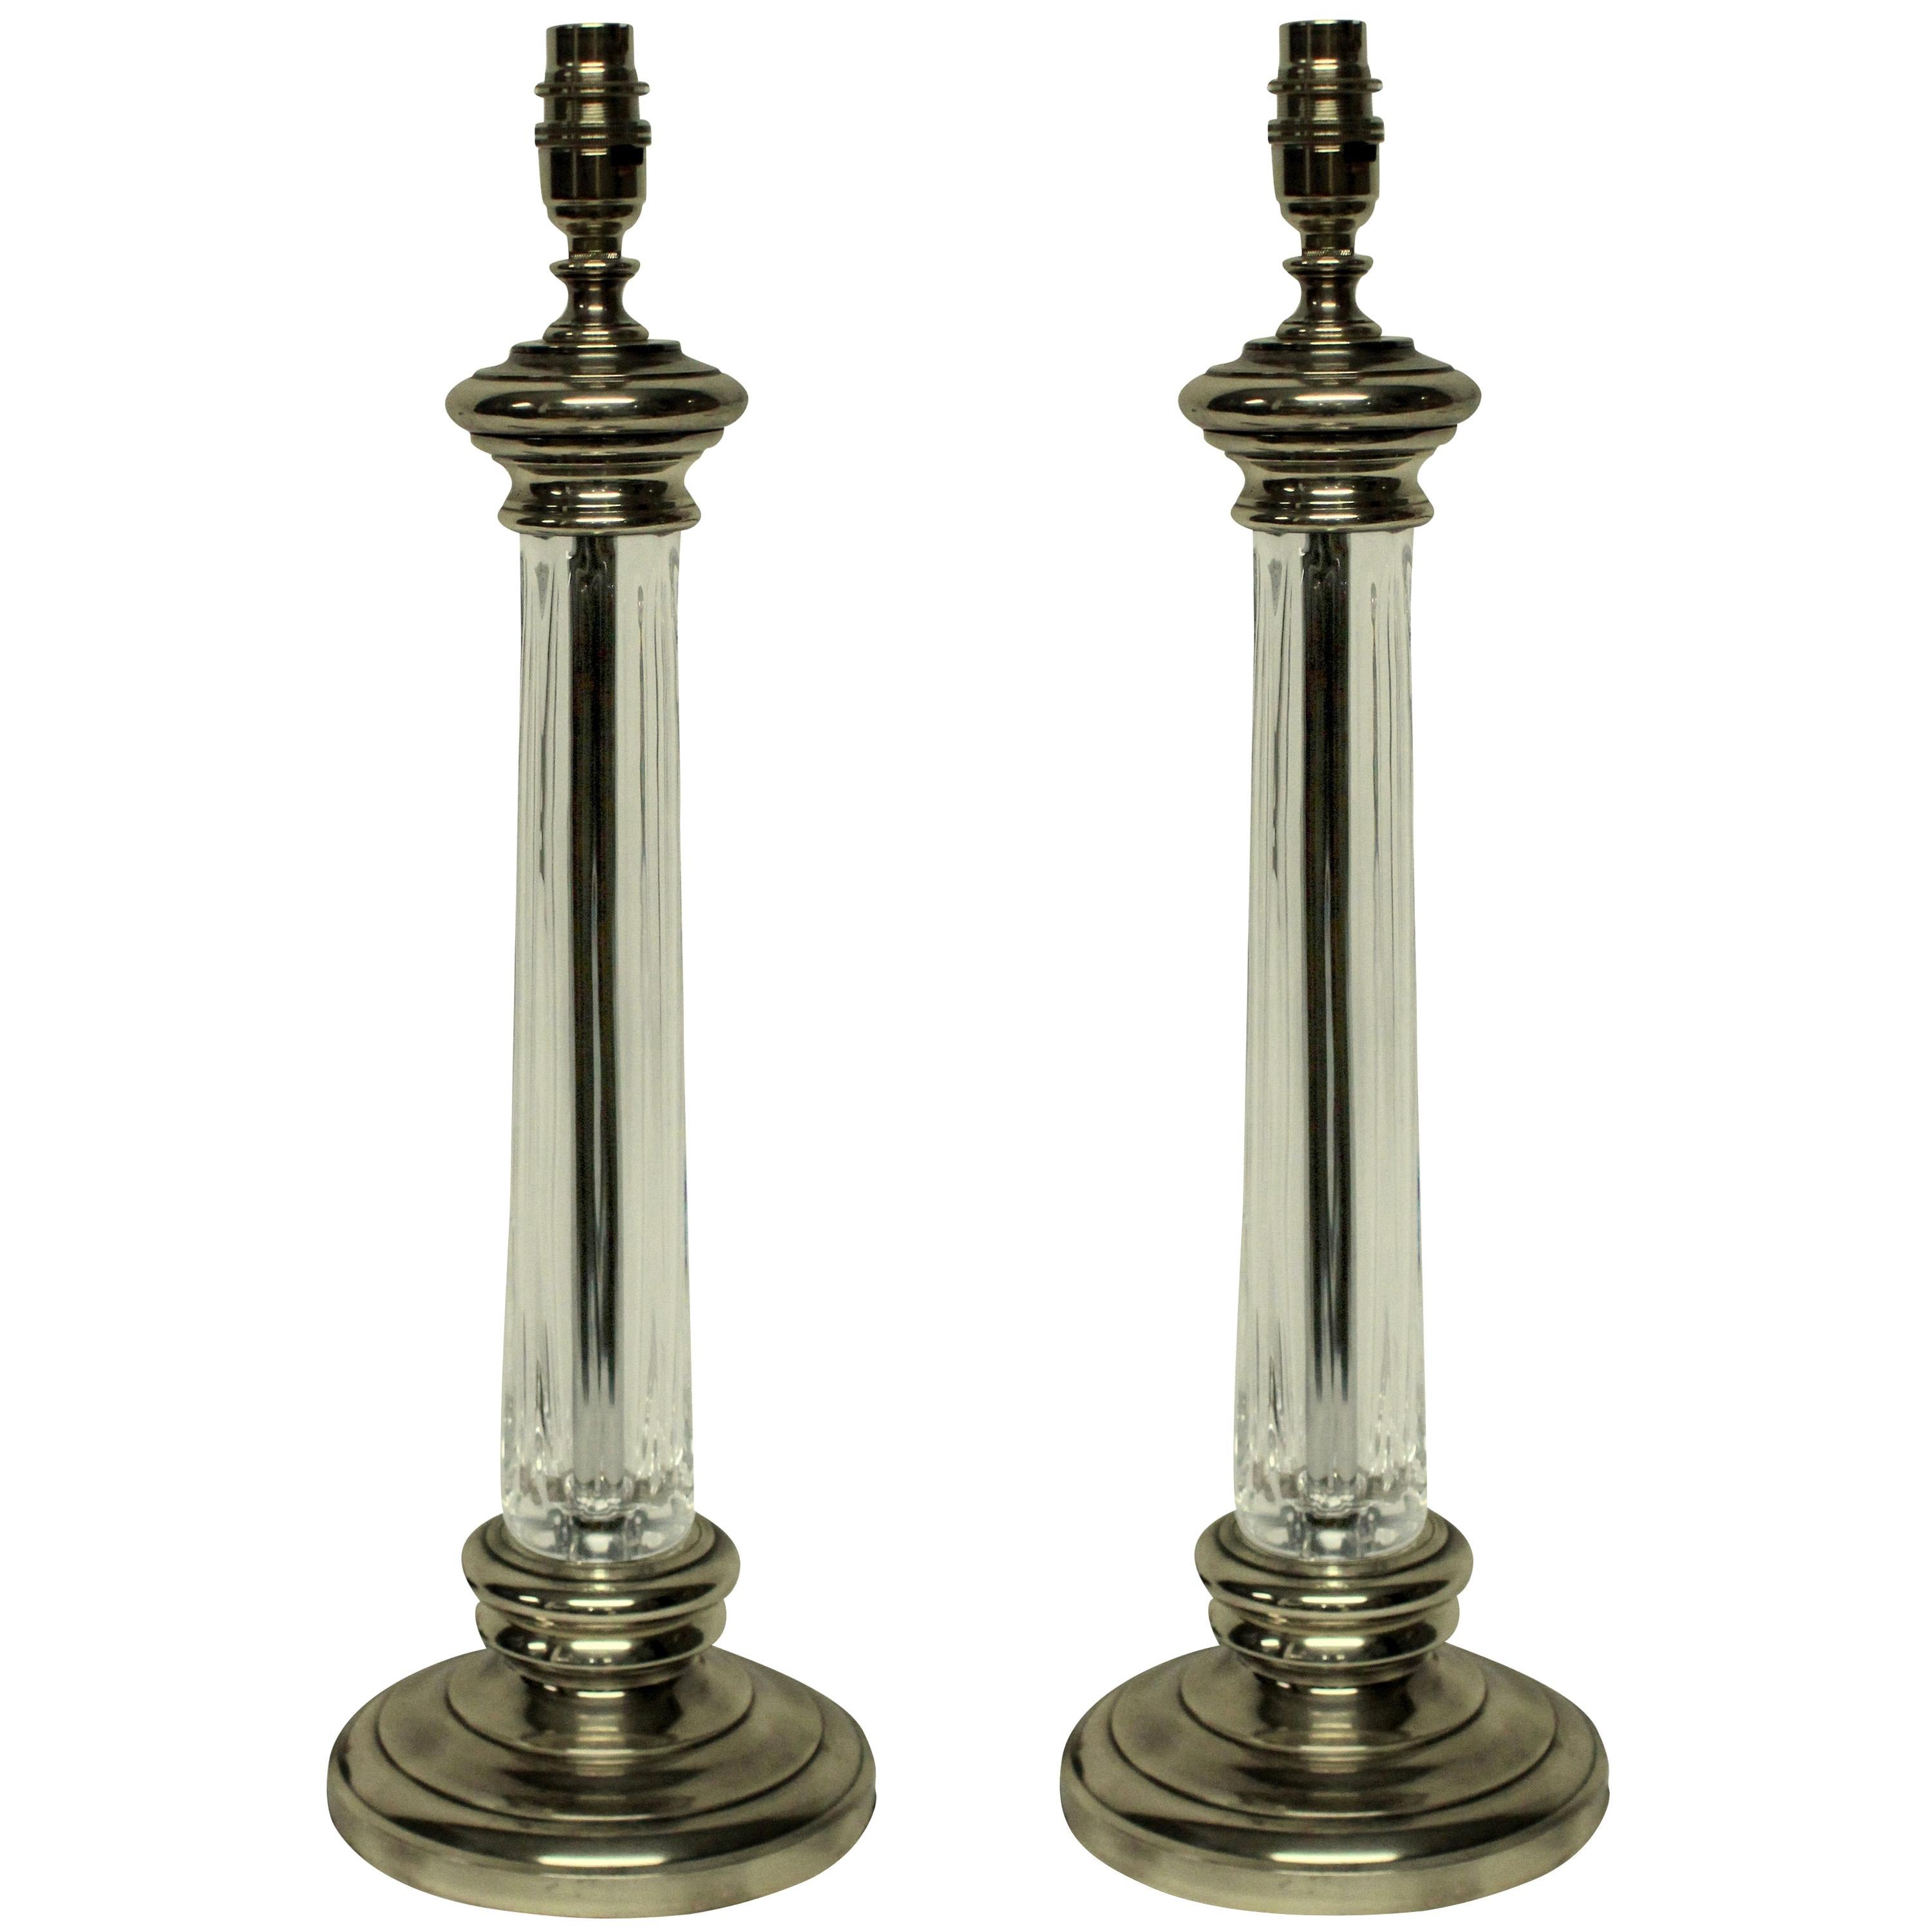 Pair of English Silver and Cut-Glass Column Lamps